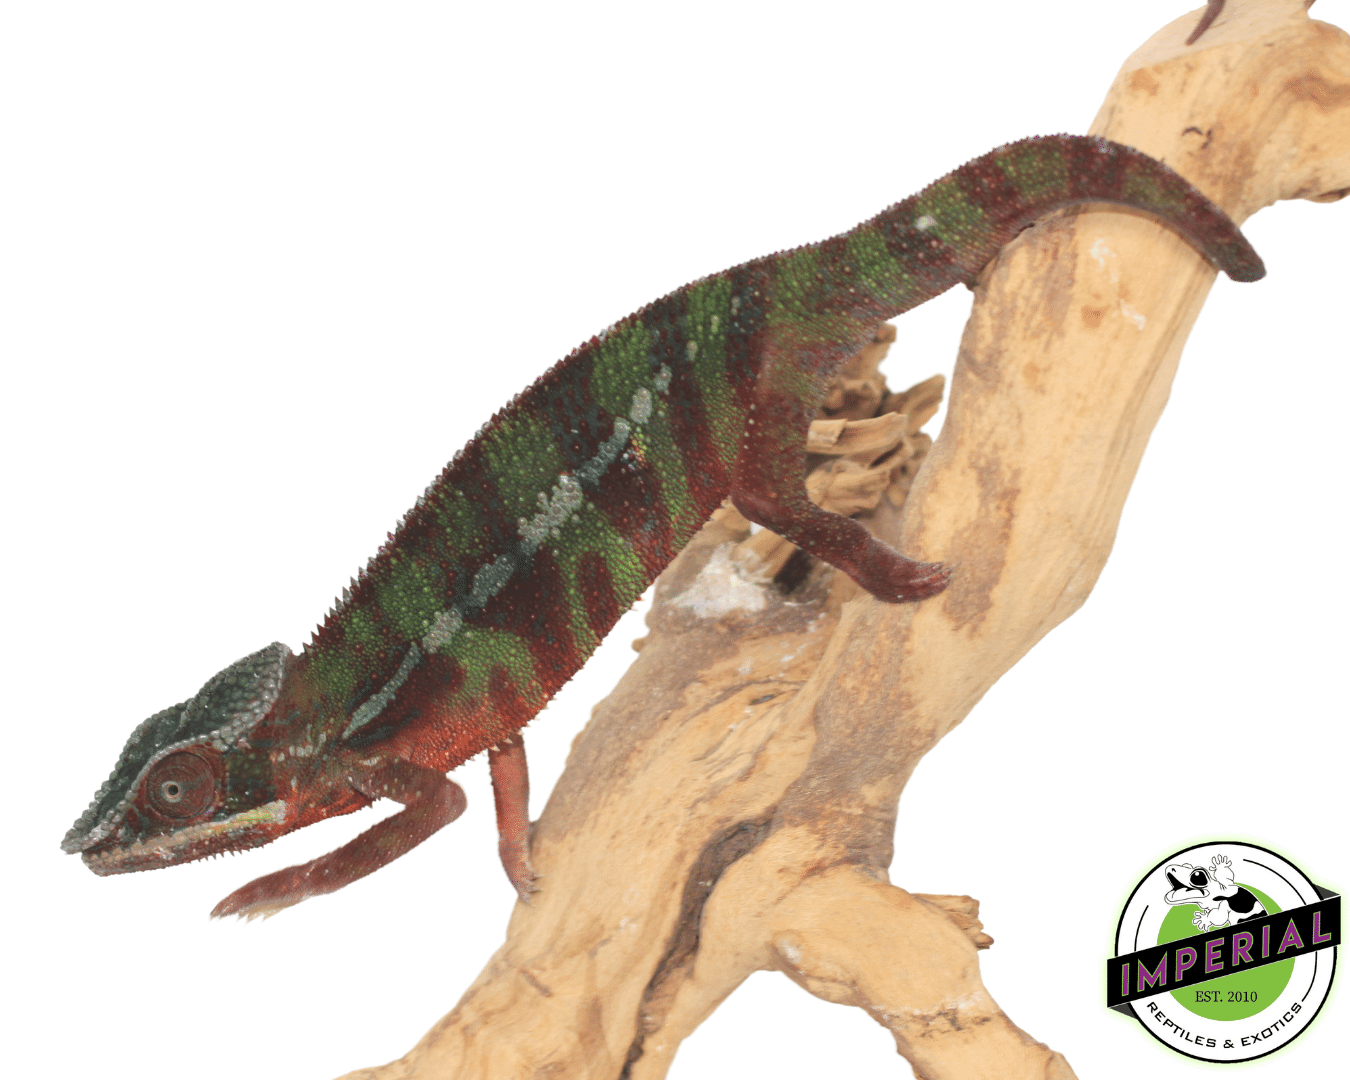 ambilobe panther chameleon for sale, buy reptiles online